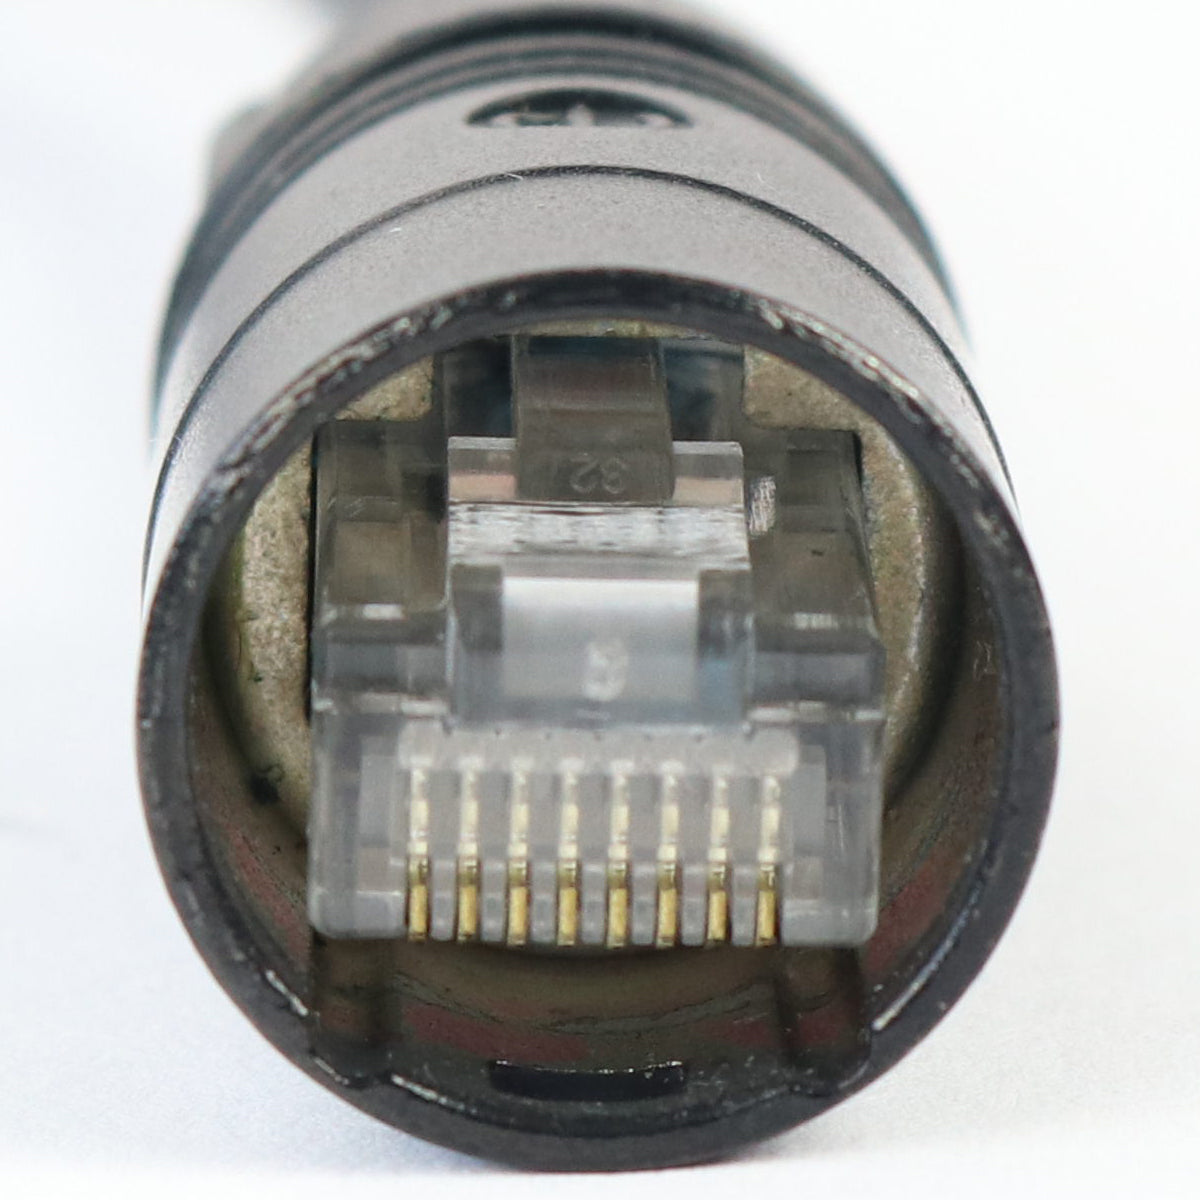 Rugged Tactical CAT5 Cable Assembly With etherCON Connectors